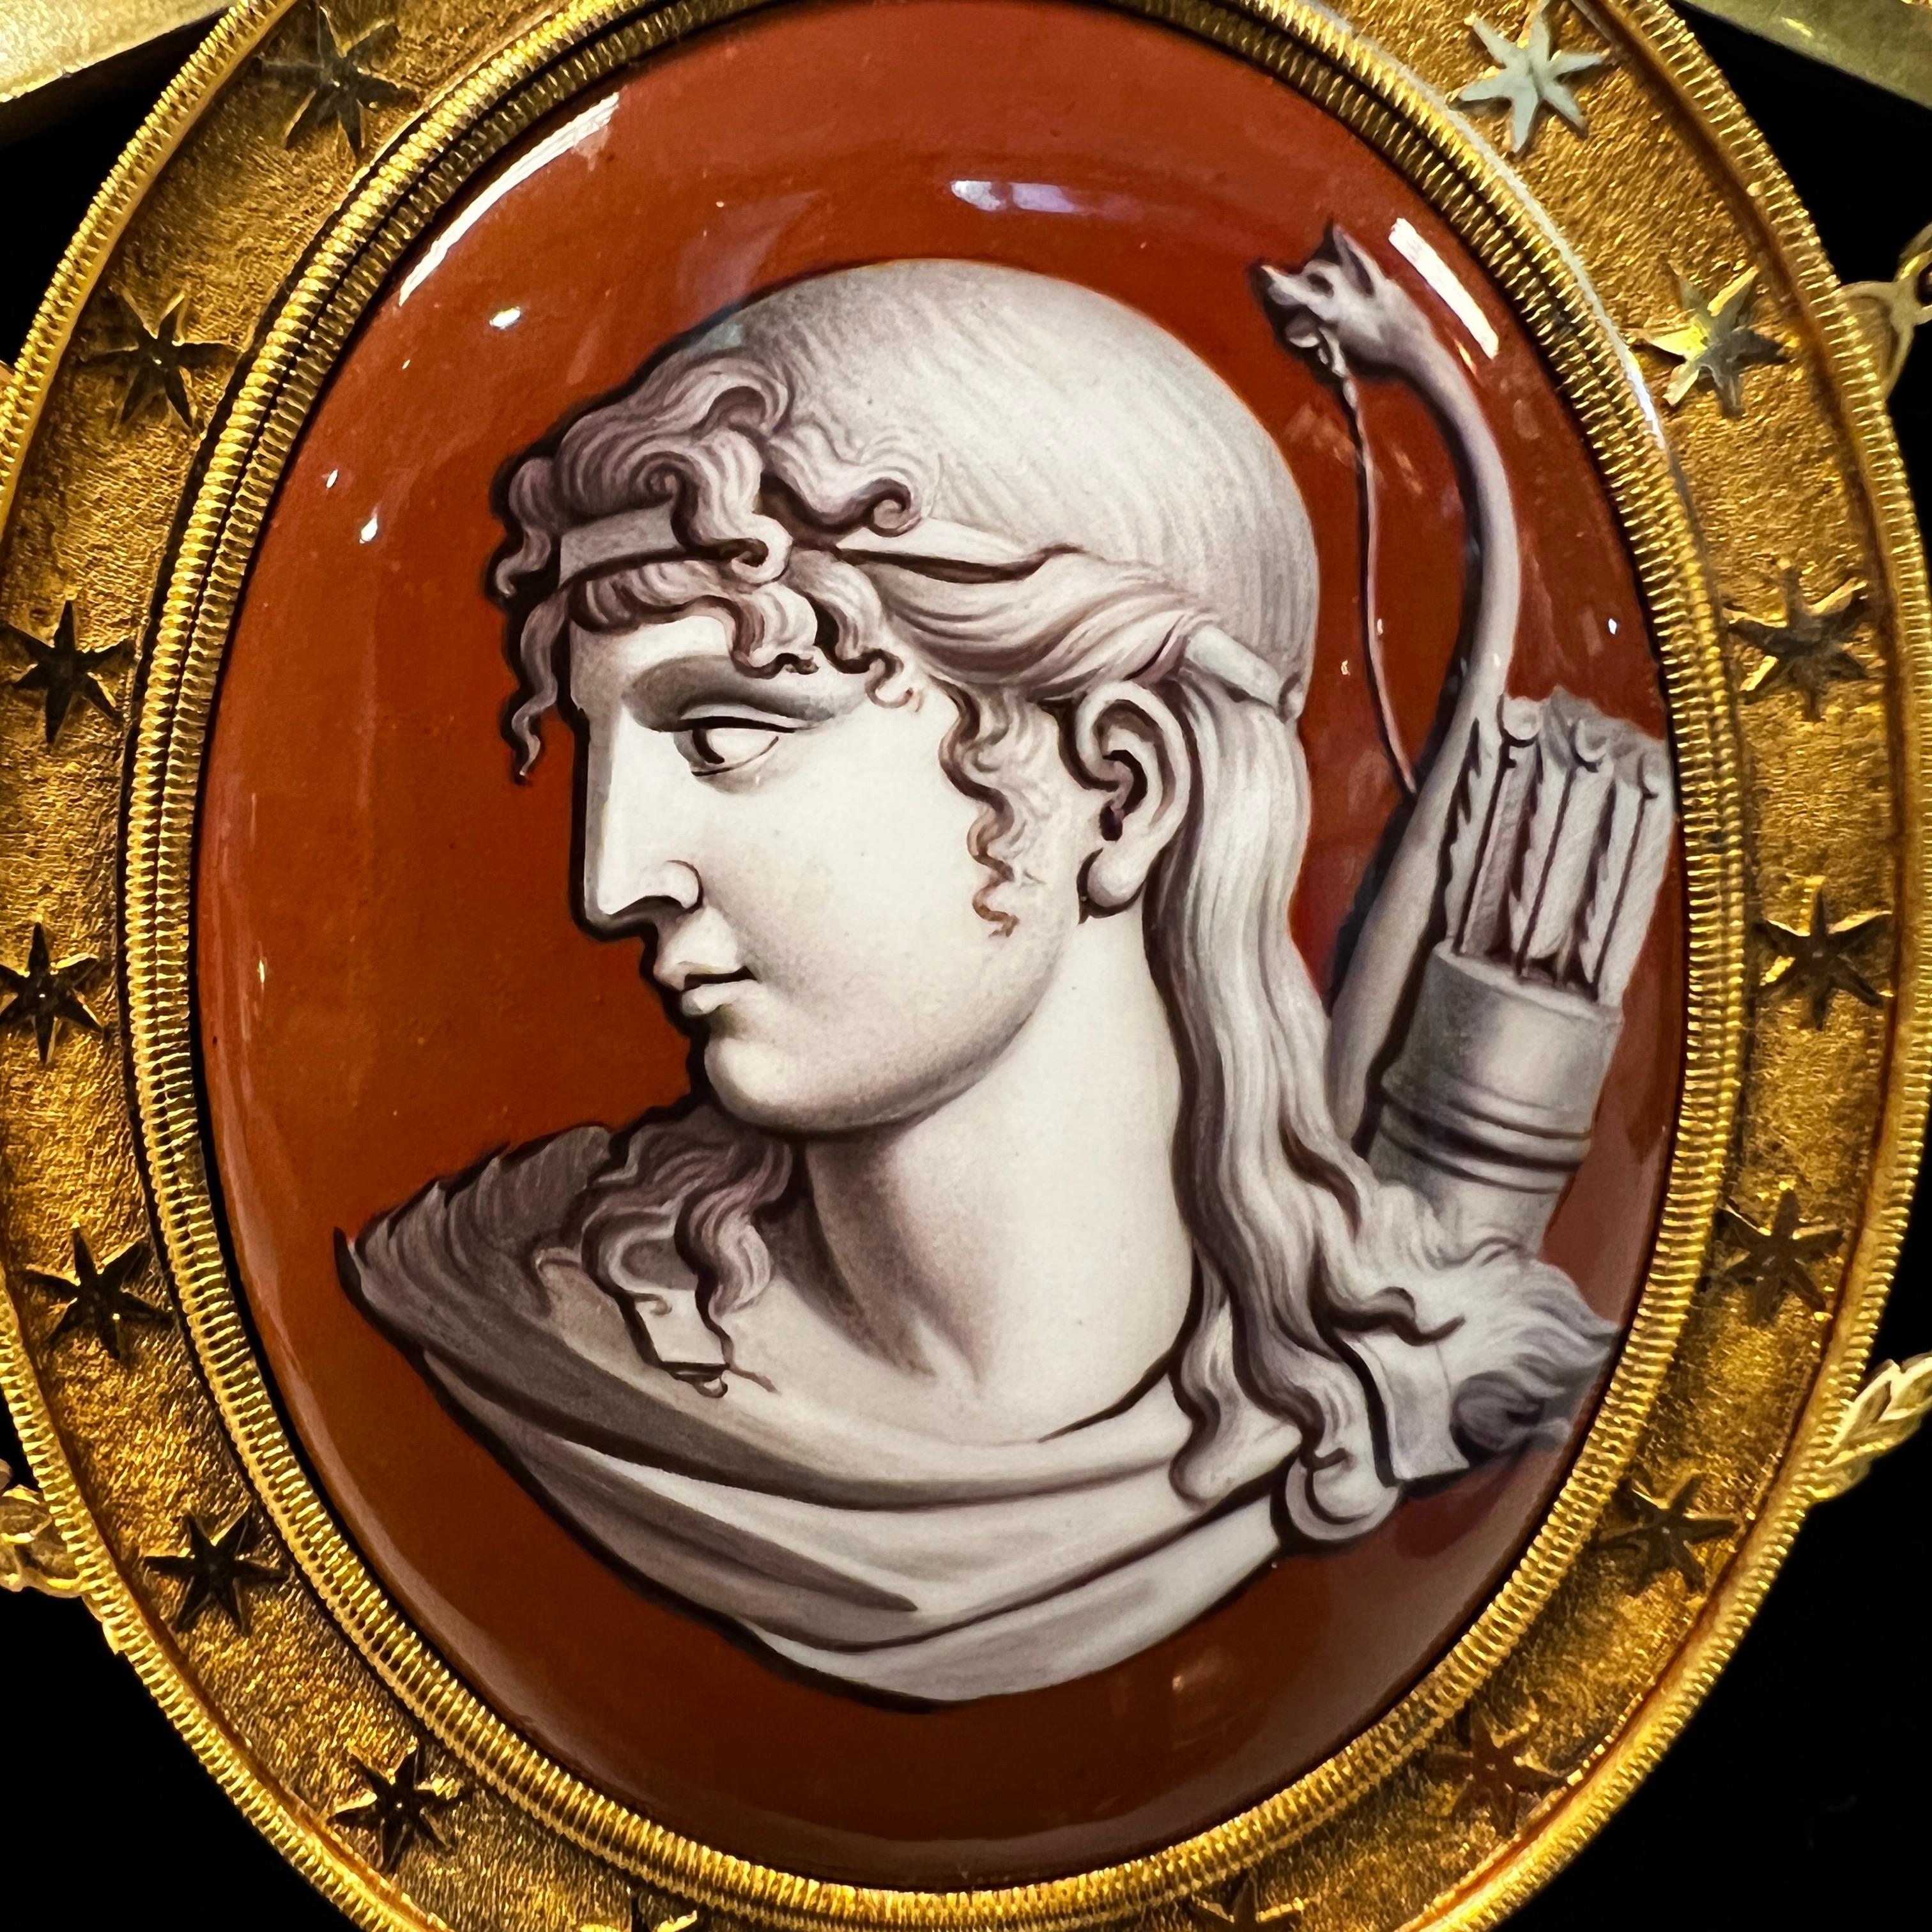 Enamel and Gilt Bronze Cameo Necklace Depicting Goddess Artemis / Diana In Good Condition For Sale In New York, US